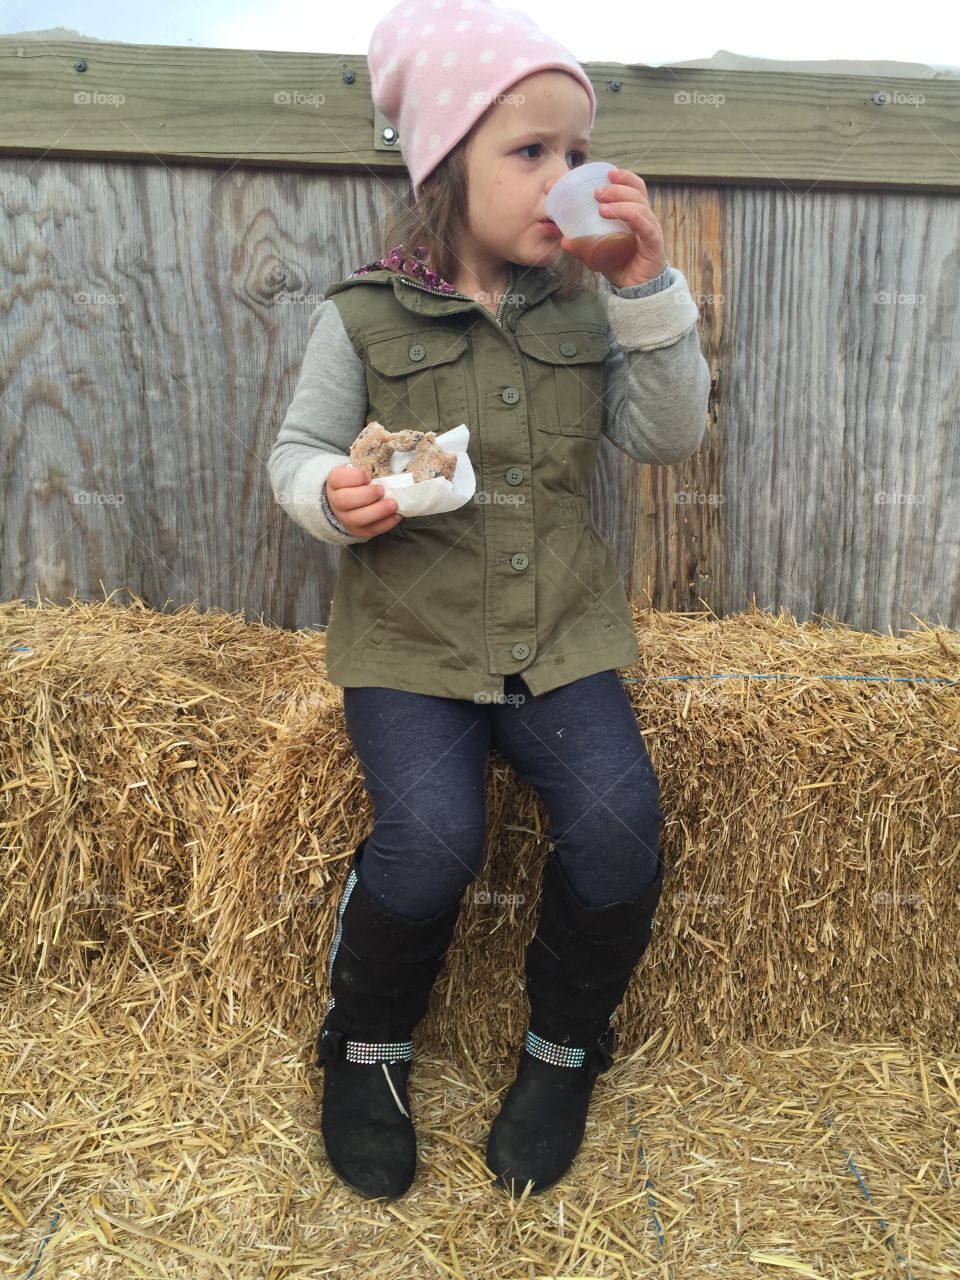 Cider and Donuts